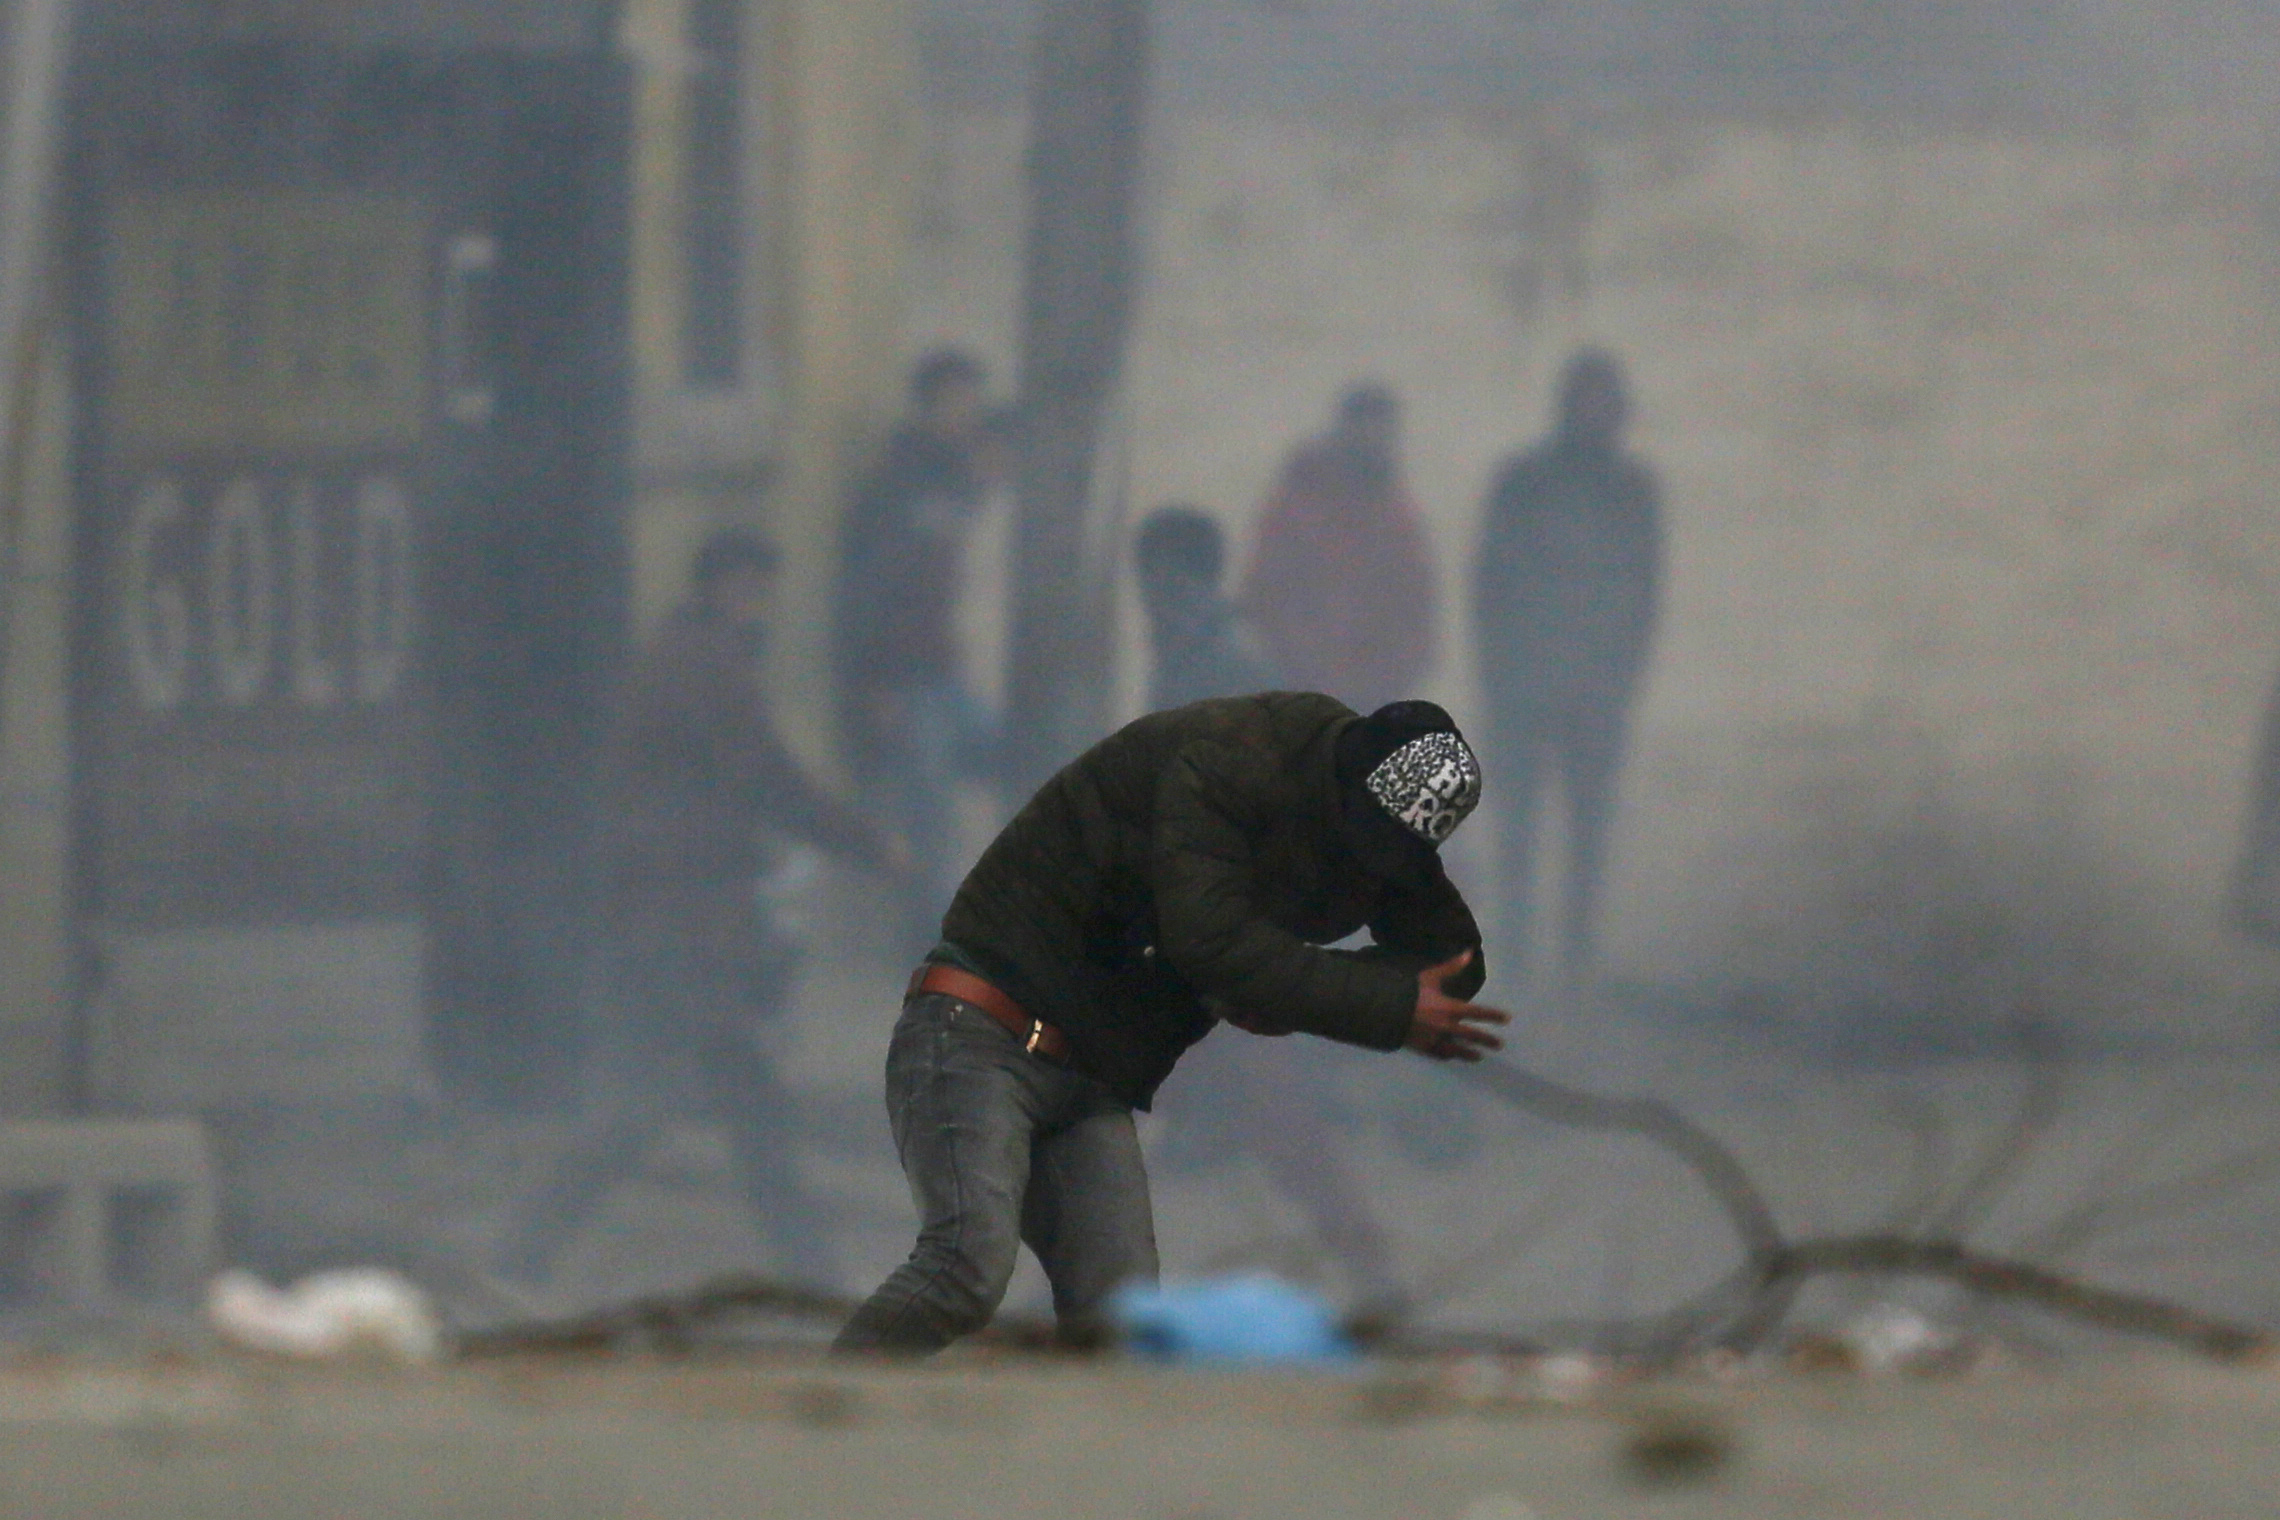 A Kashmiri protester ducks to avoid tear smoke shell during a clash with Indian paramilitary soldiers in Srinagar - AP